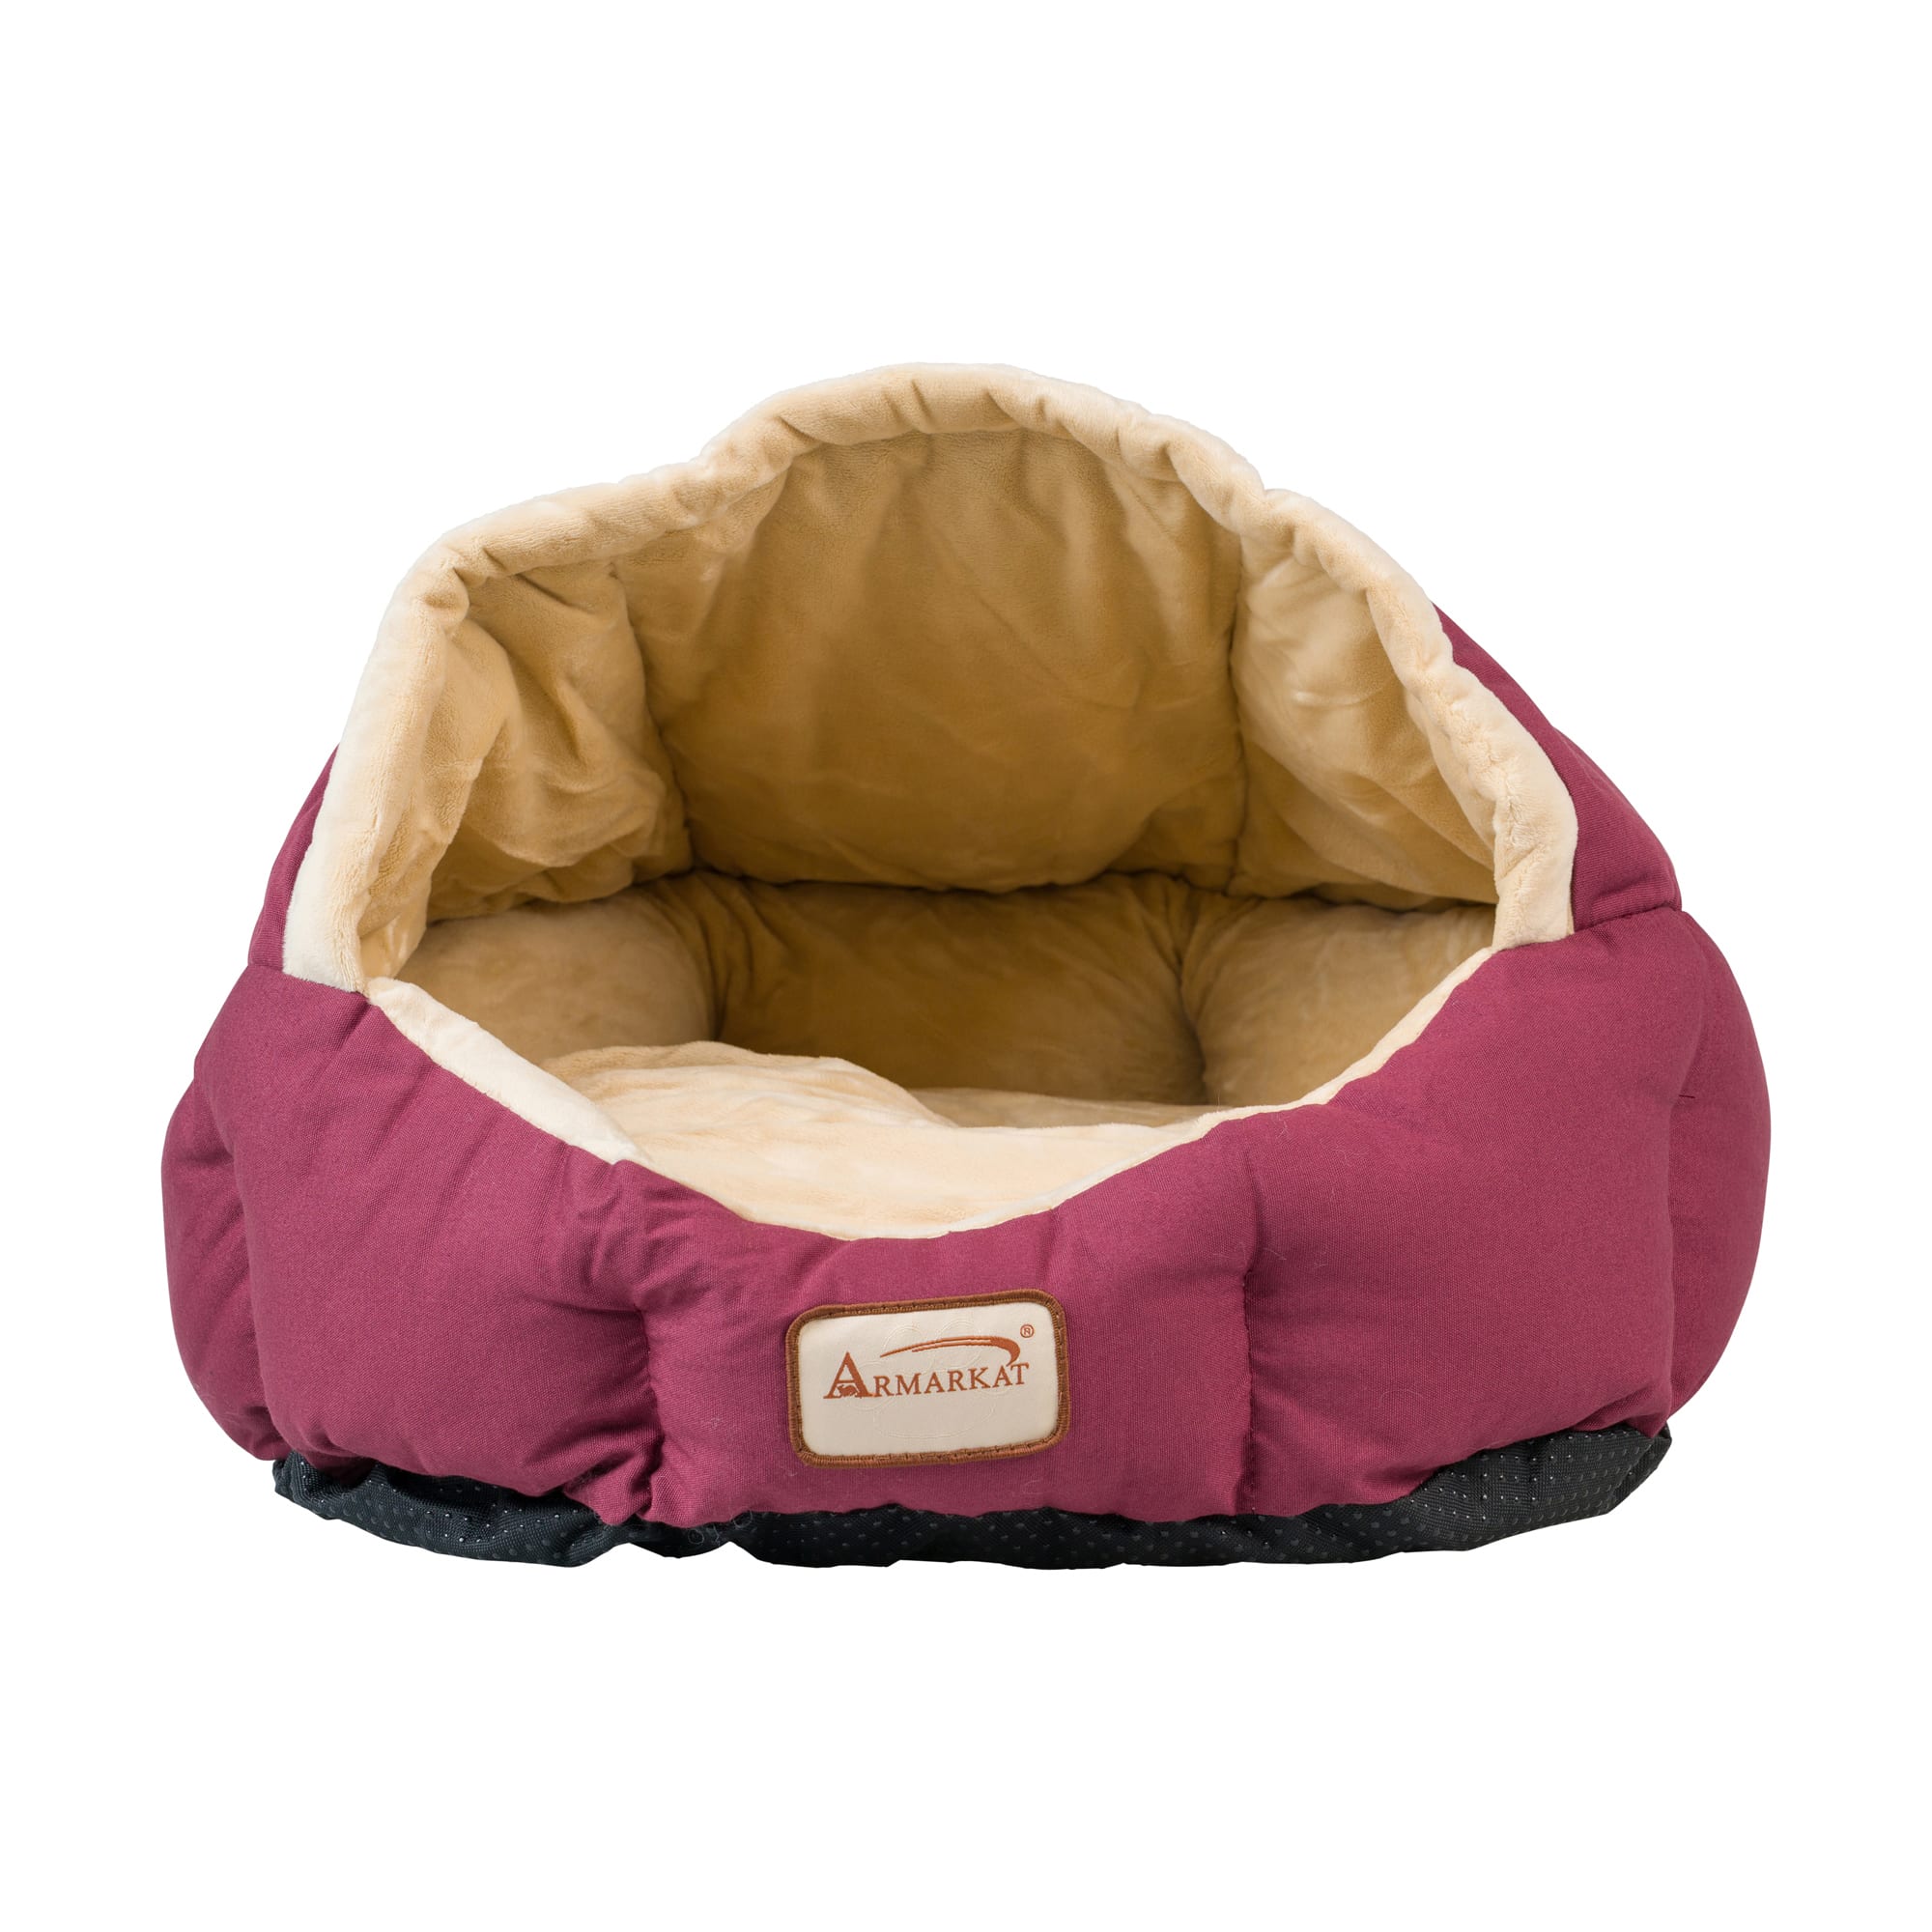 Photos - Bed & Furniture Armarkat Burgundy/Ivory Pet Bed, 18" L X 14" W X 11" H, Small, Bu 